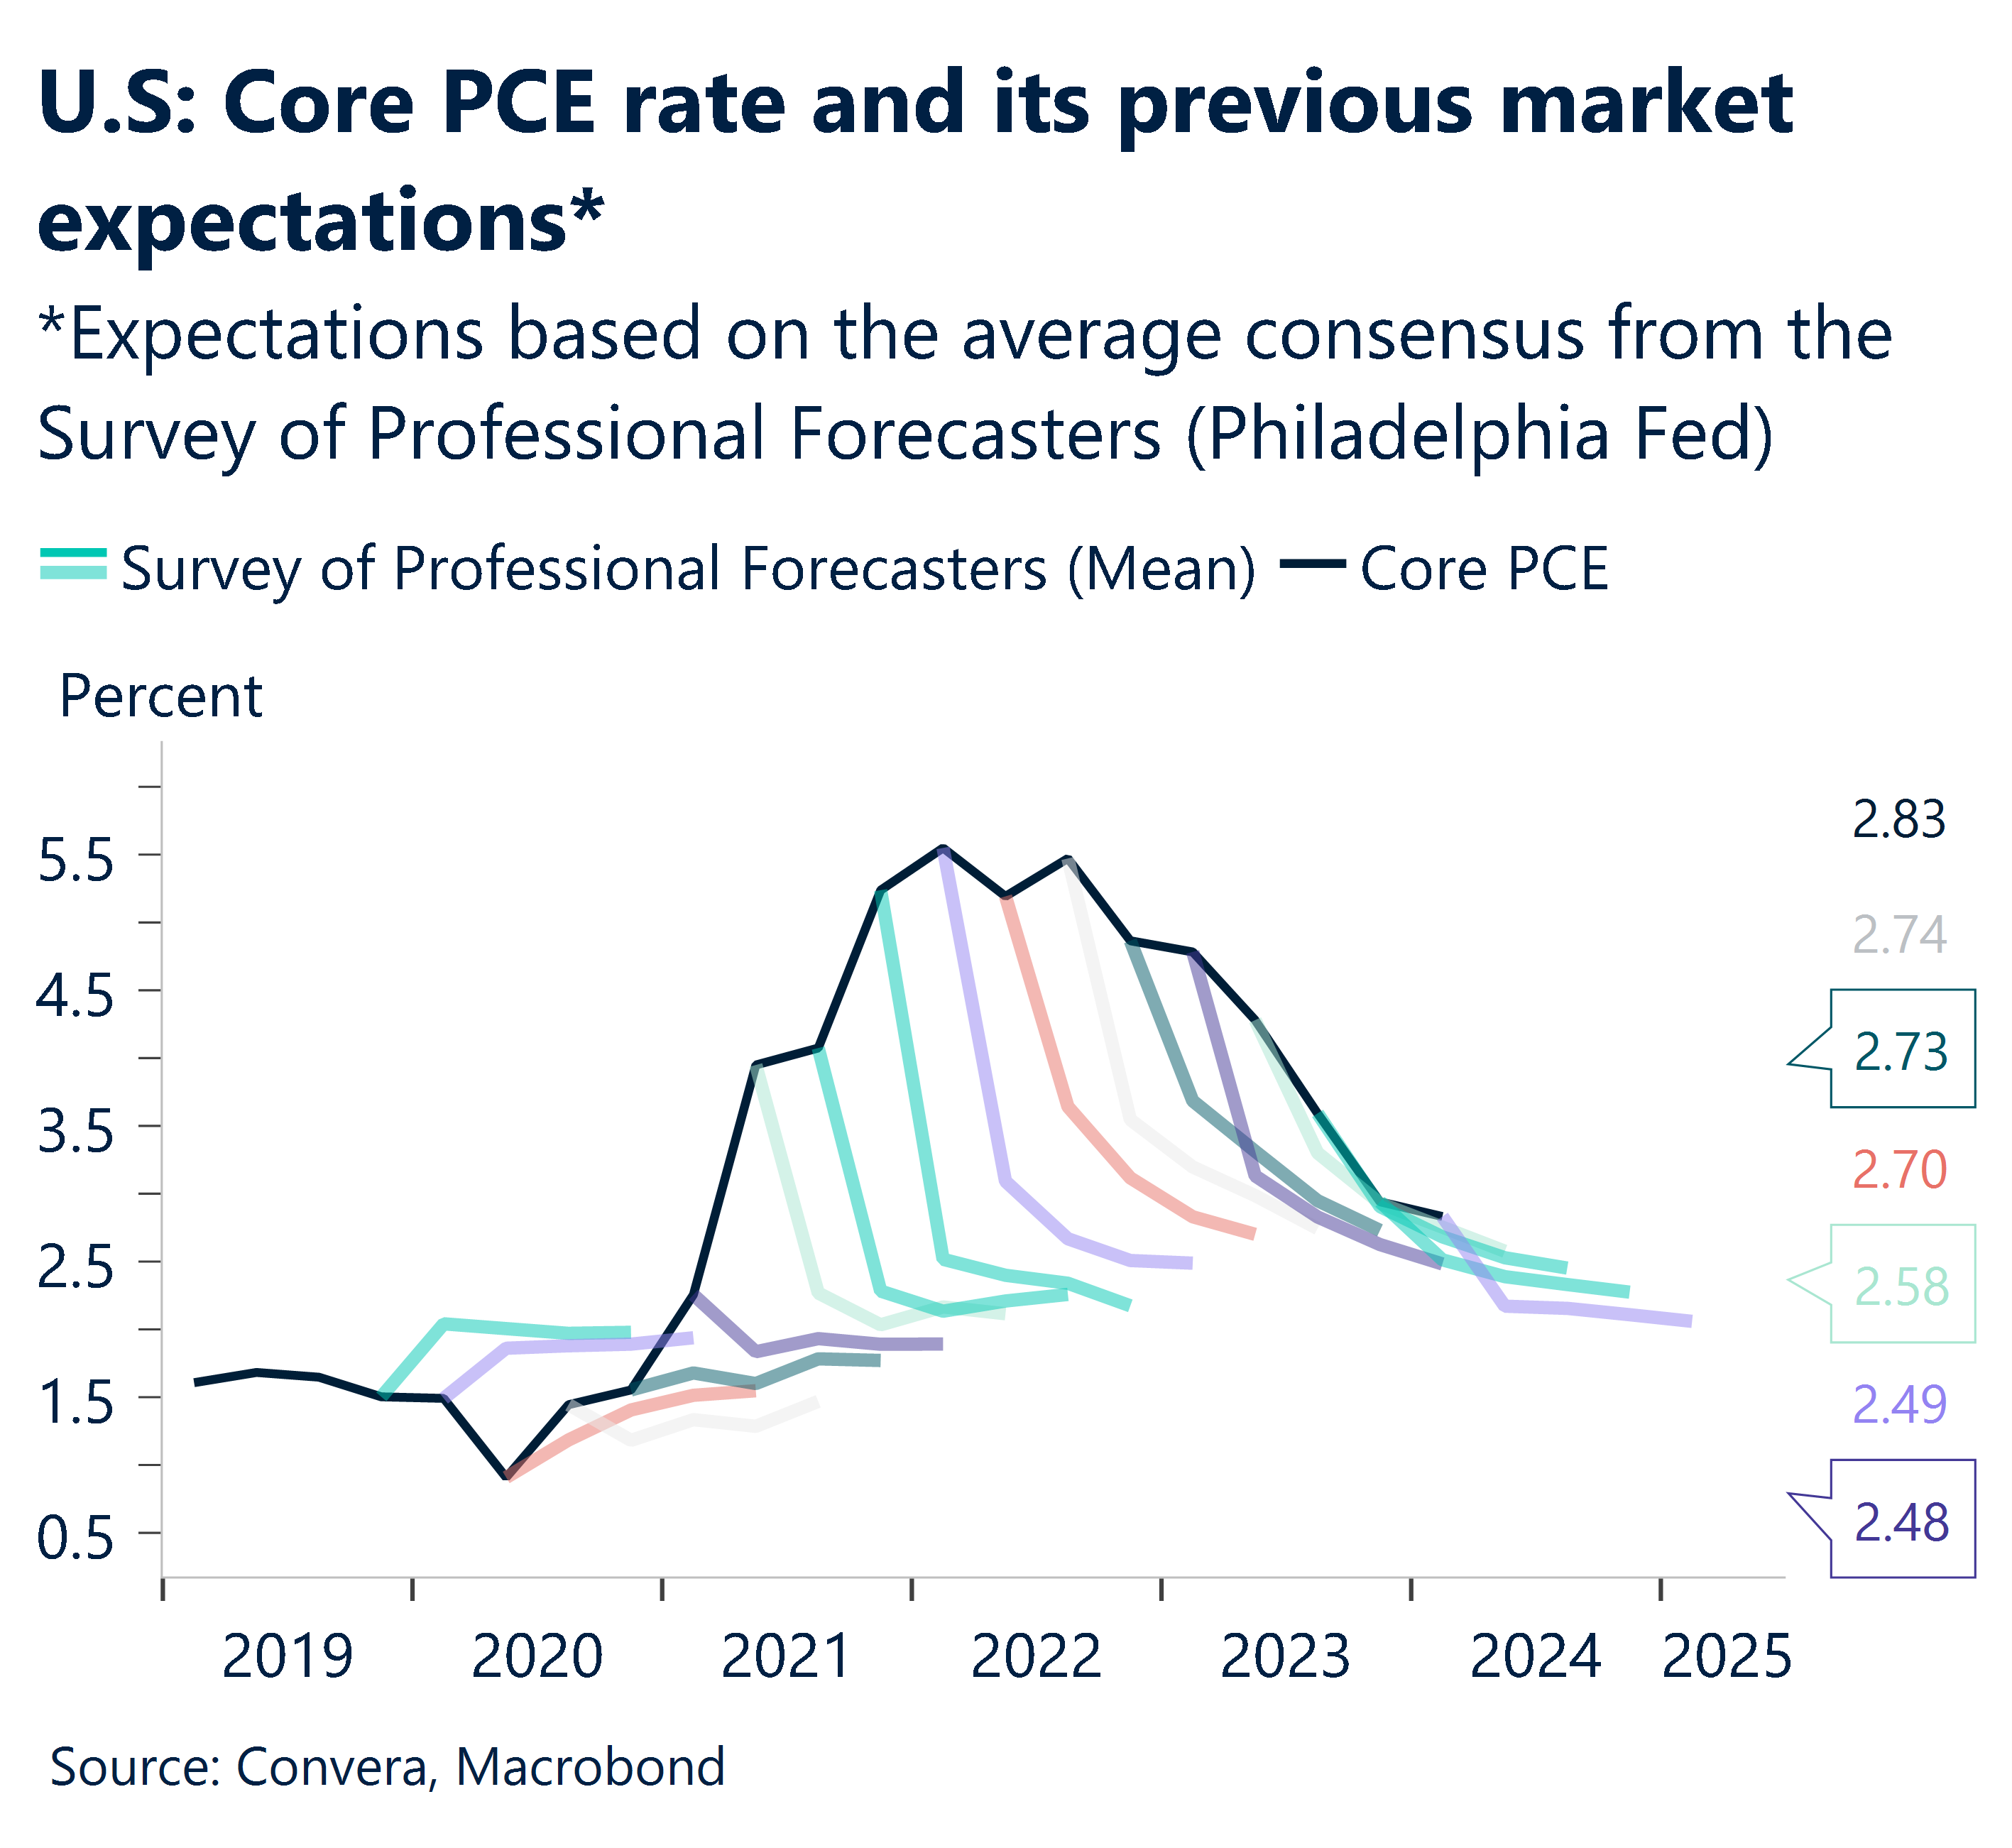 Chart showing US core PCE rate and its previous market expectations